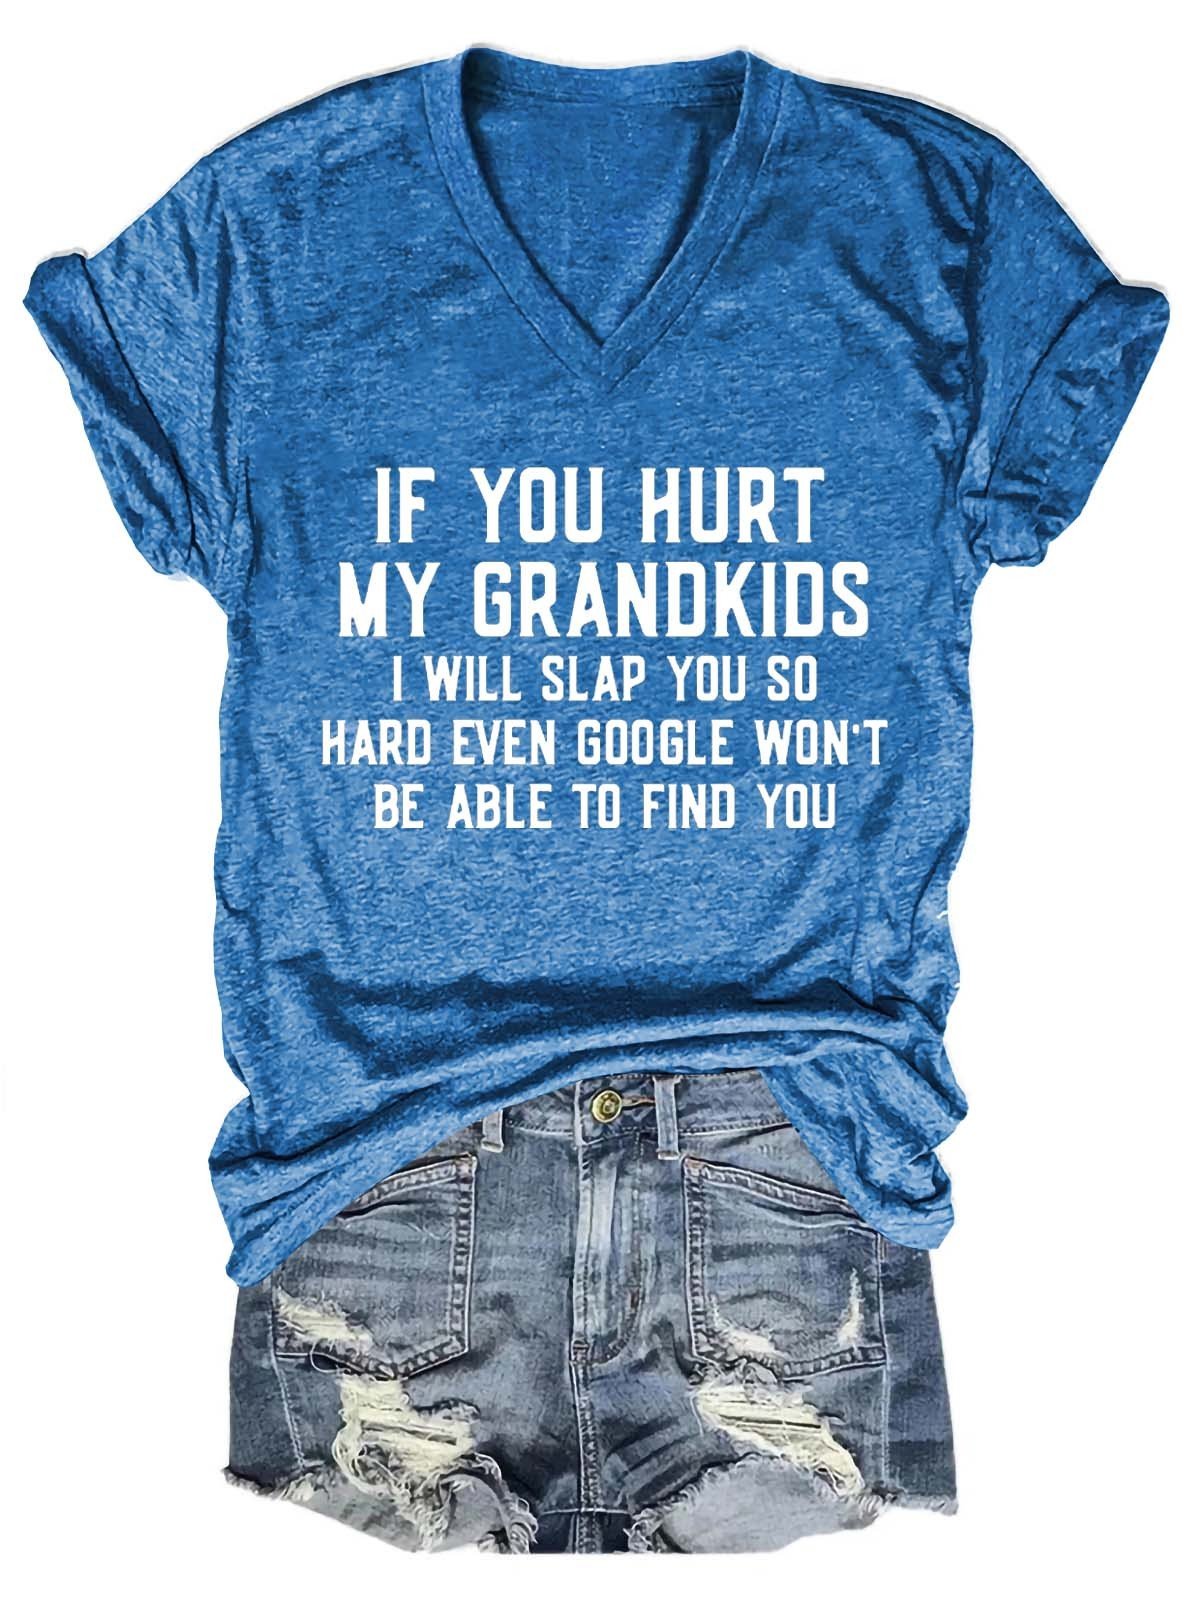 Women's If You Hurt My Grandkids I Will Slap You So Hard Even Google Won't Be Able To Find You V-Neck T-Shirt - Outlets Forever